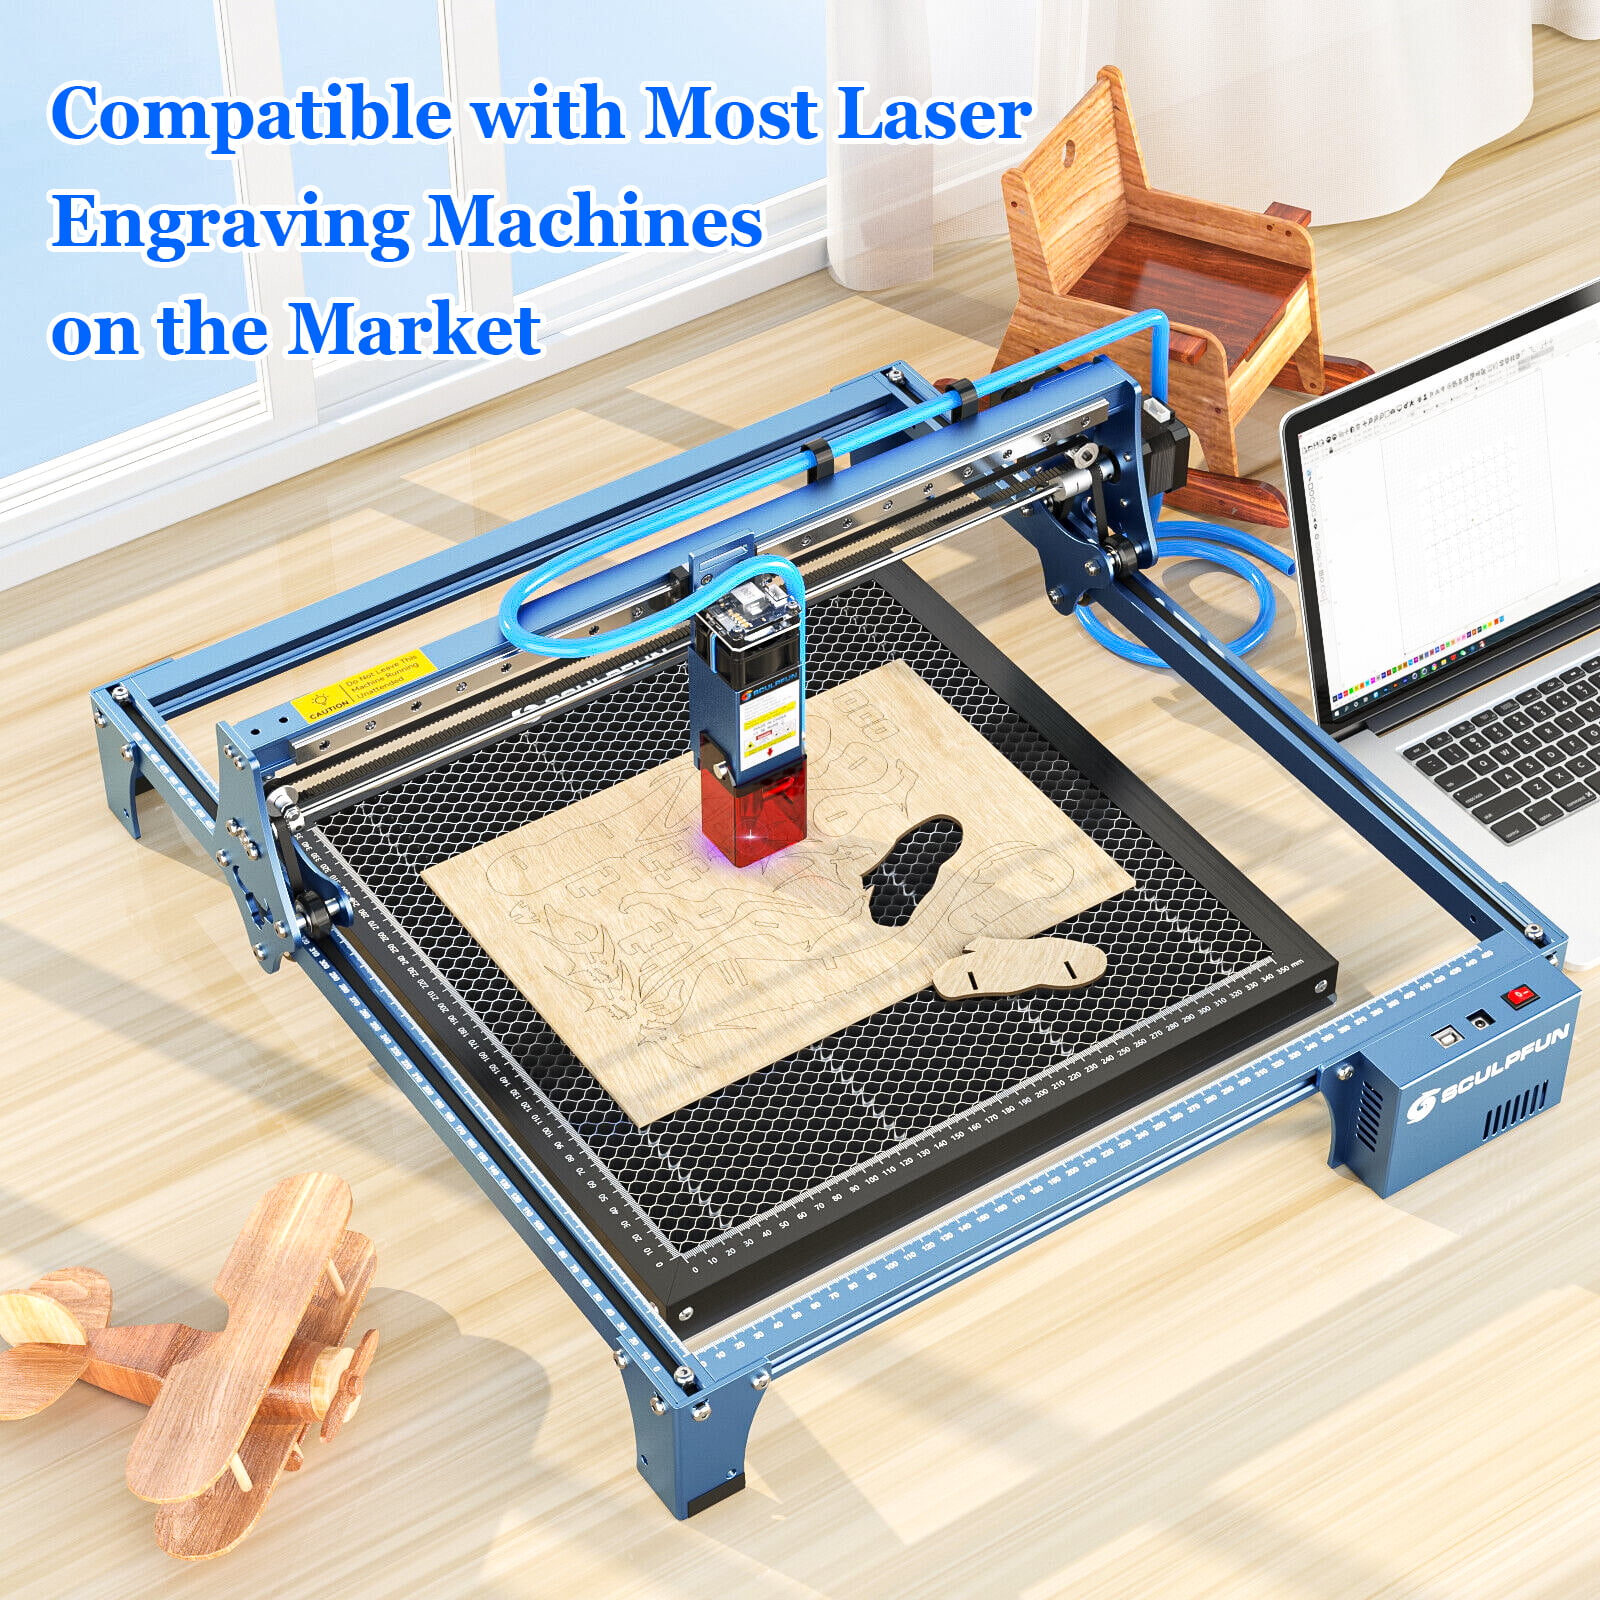 12.6*8.6 inch Honeycomb Work Bed Table for 40W CO2 Laser Engraver